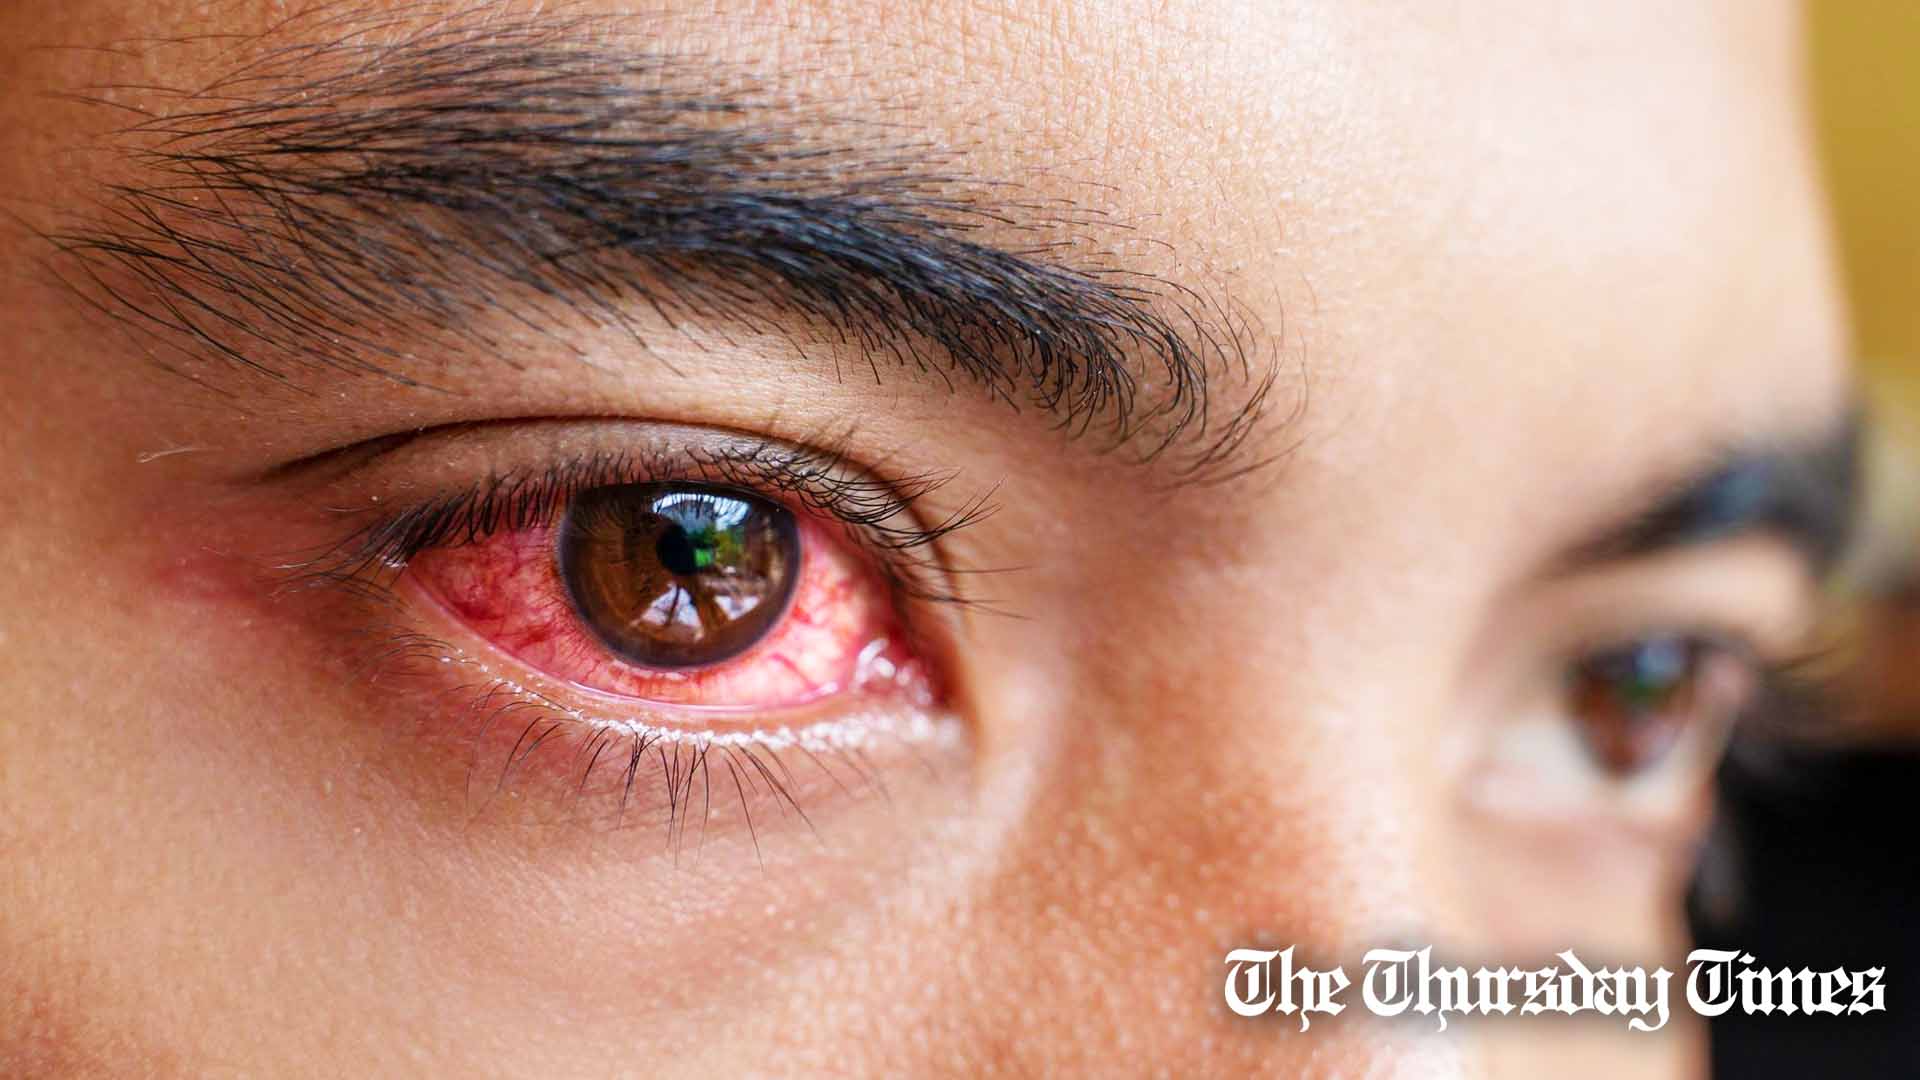 A file photo is shown of a patient with conjunctivitis. — FILE/THE THURSDAY TIMES